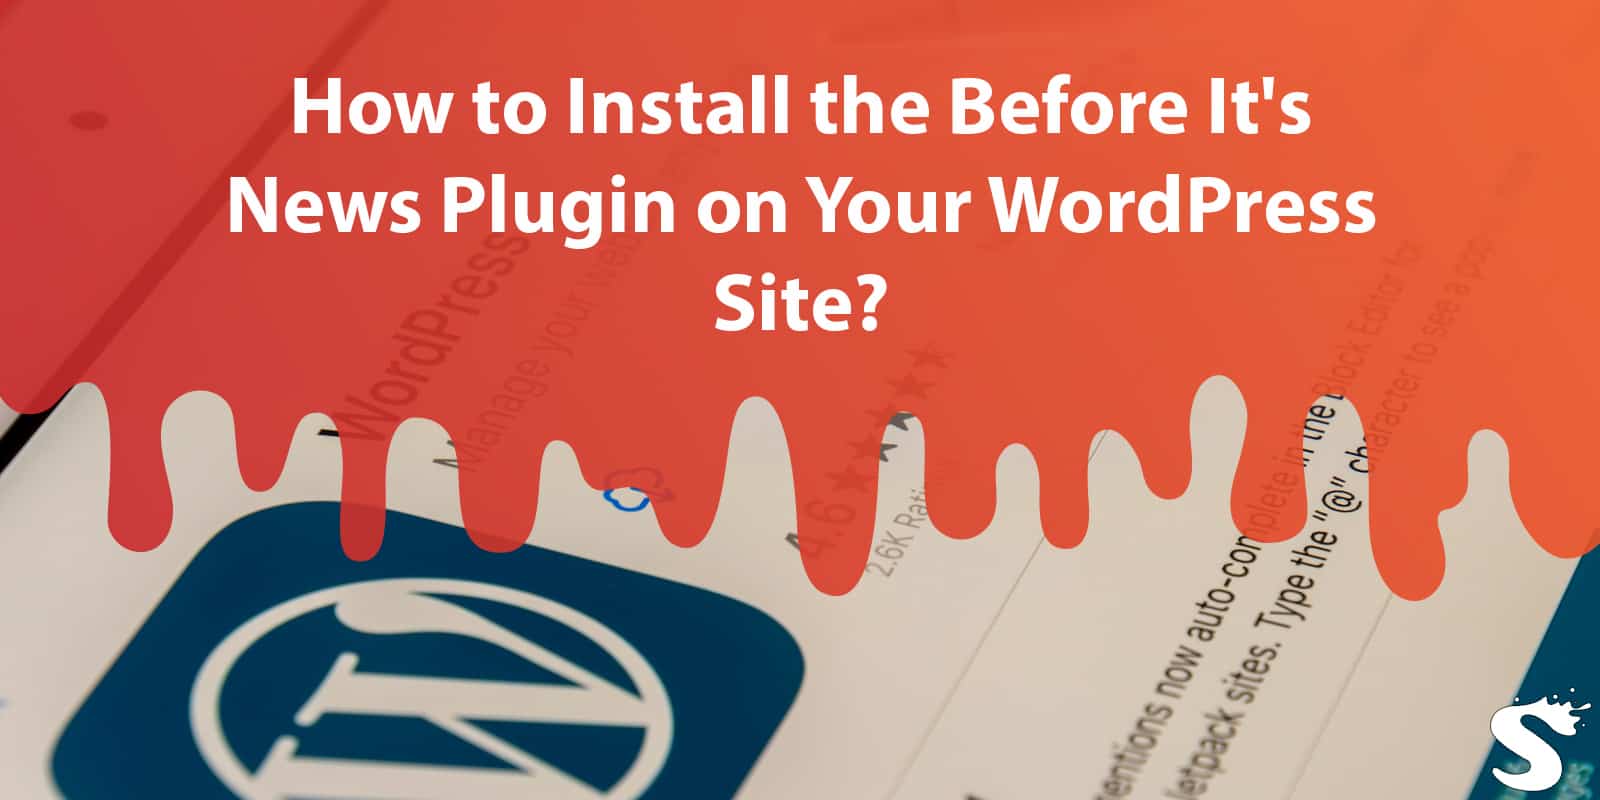 How to Install the Before It's News Plugin on Your WordPress Site?